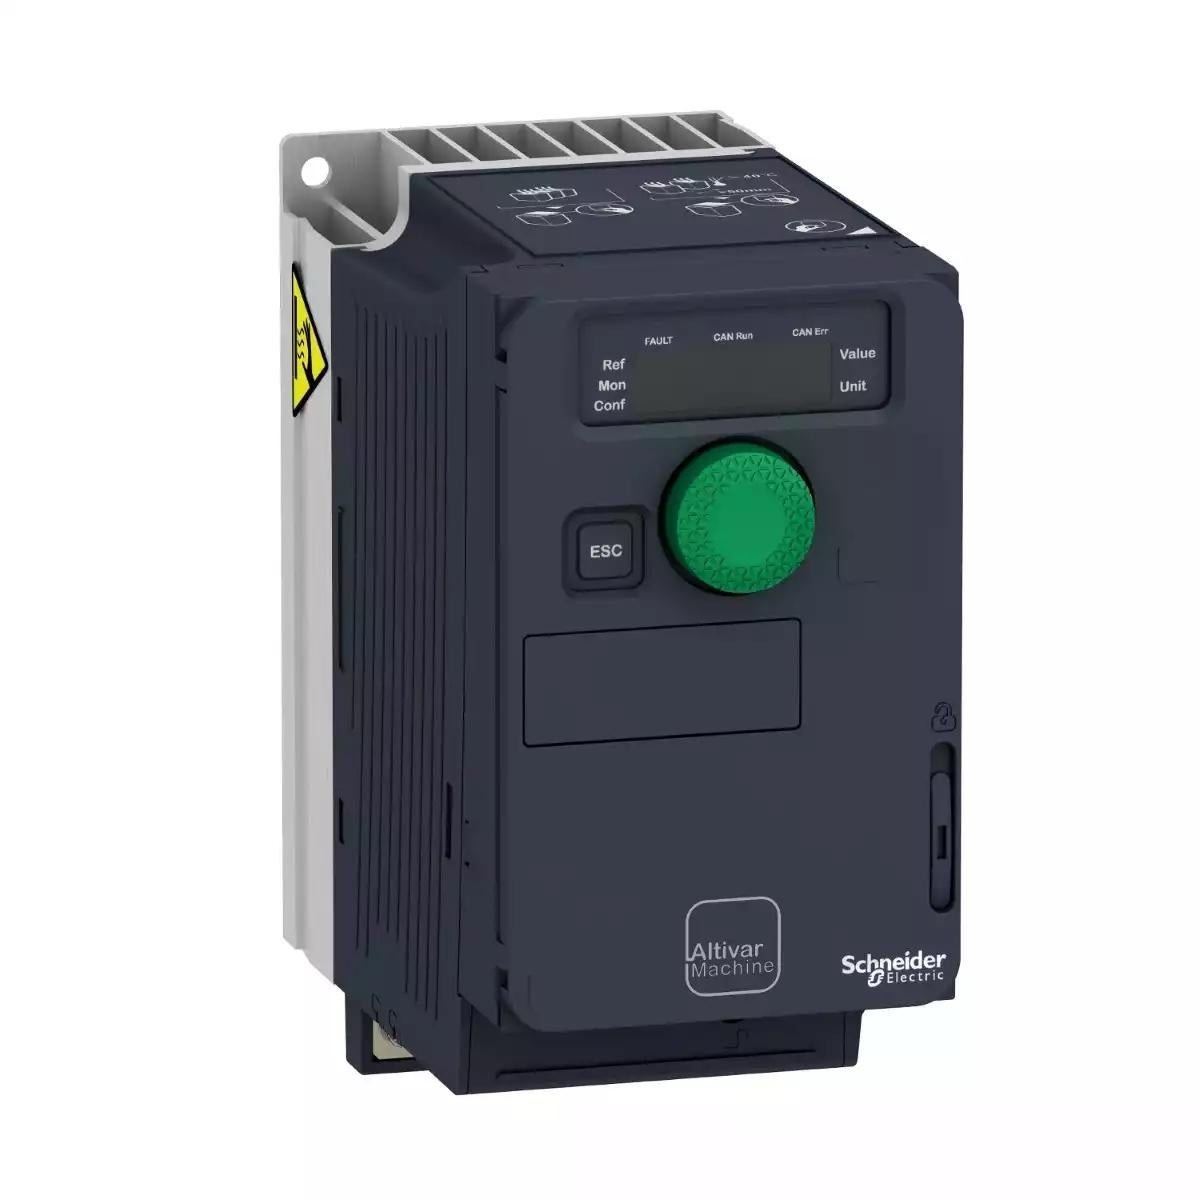 variable speed drive, Altivar Machine ATV320, 0.75kW, 200 to 240V, 3 phases, compact